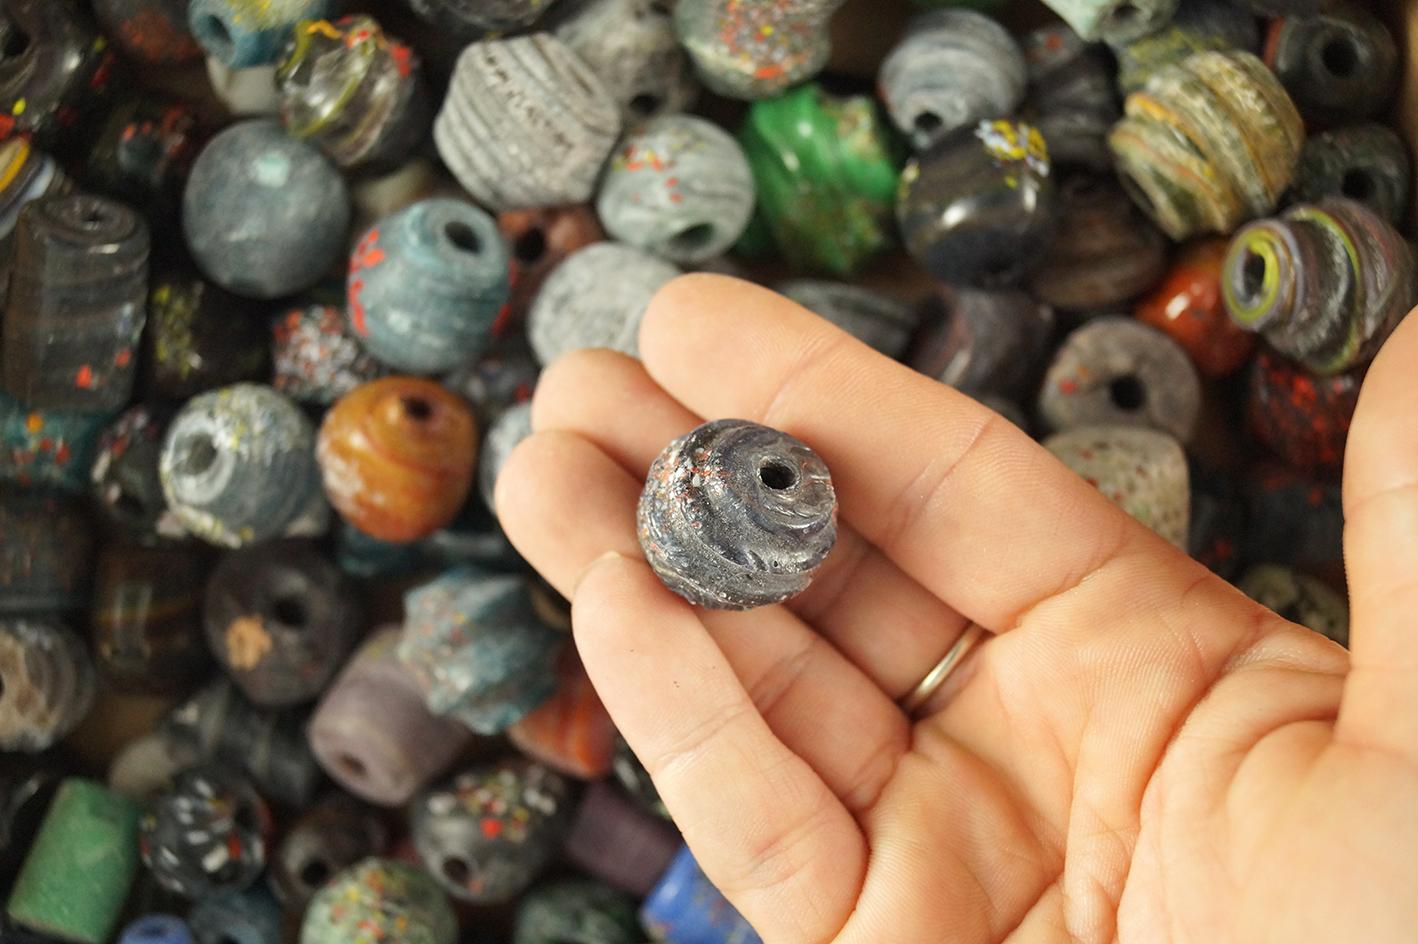 Large group of unique old glass beads from the Middle East.